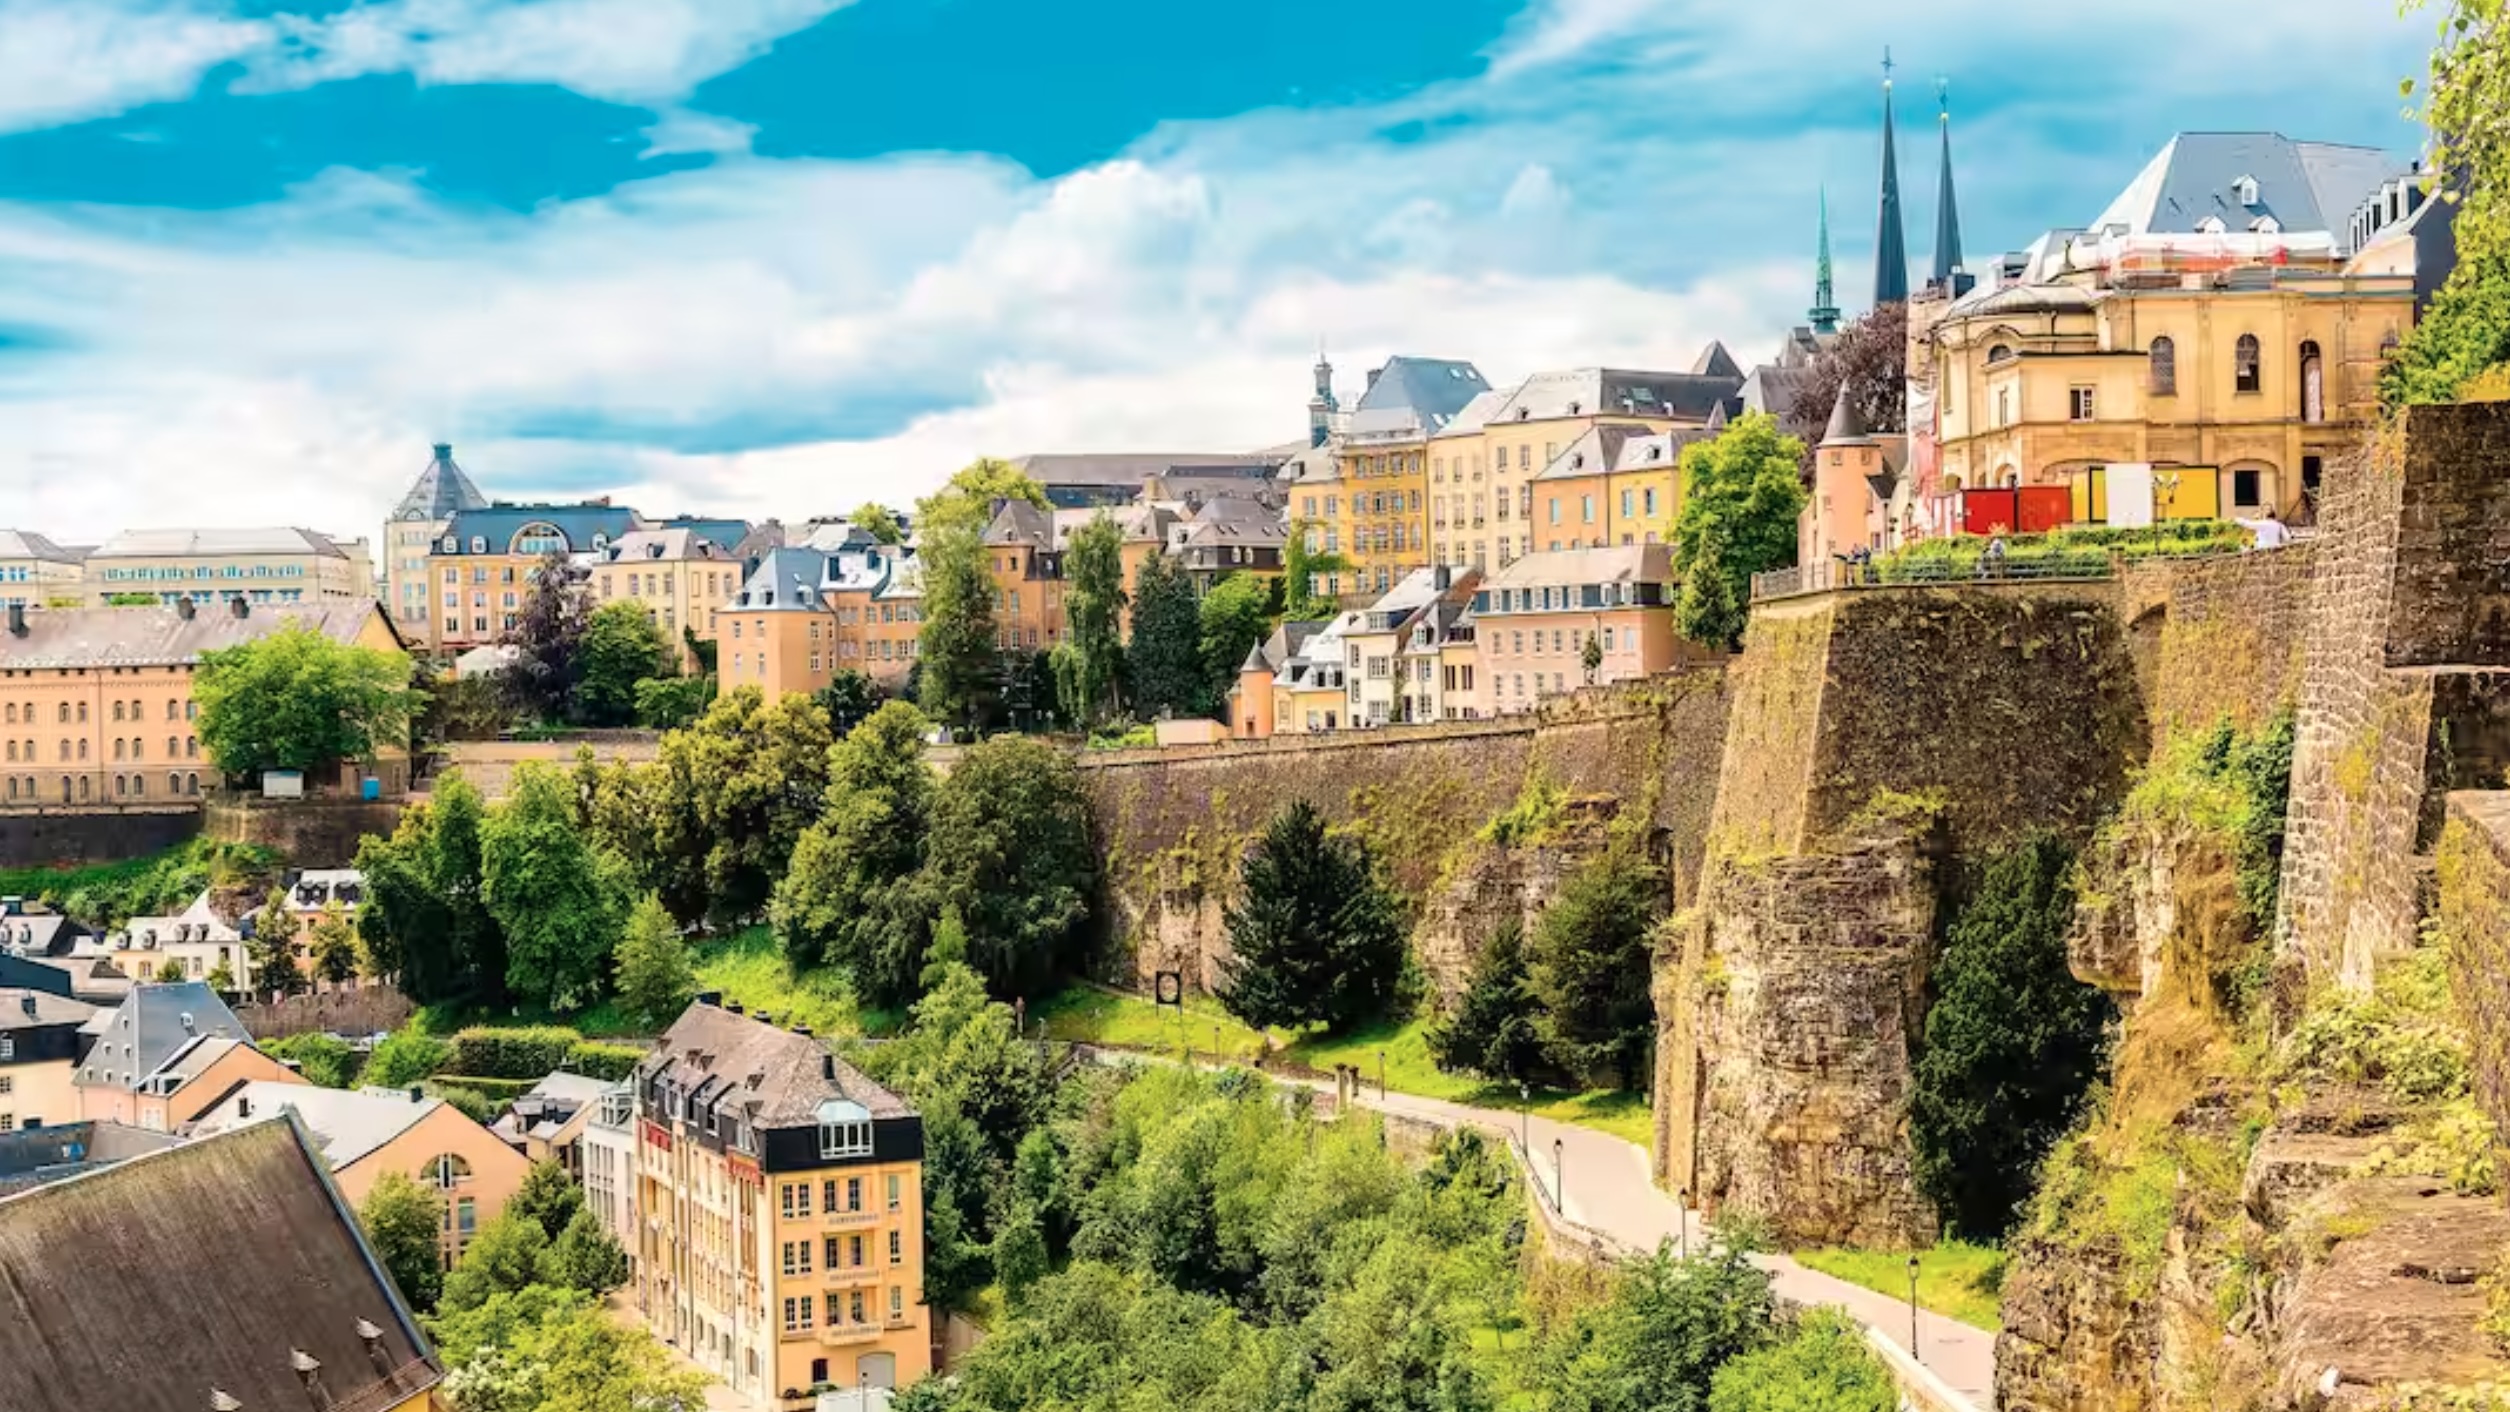 View of Luxembourg city from the air